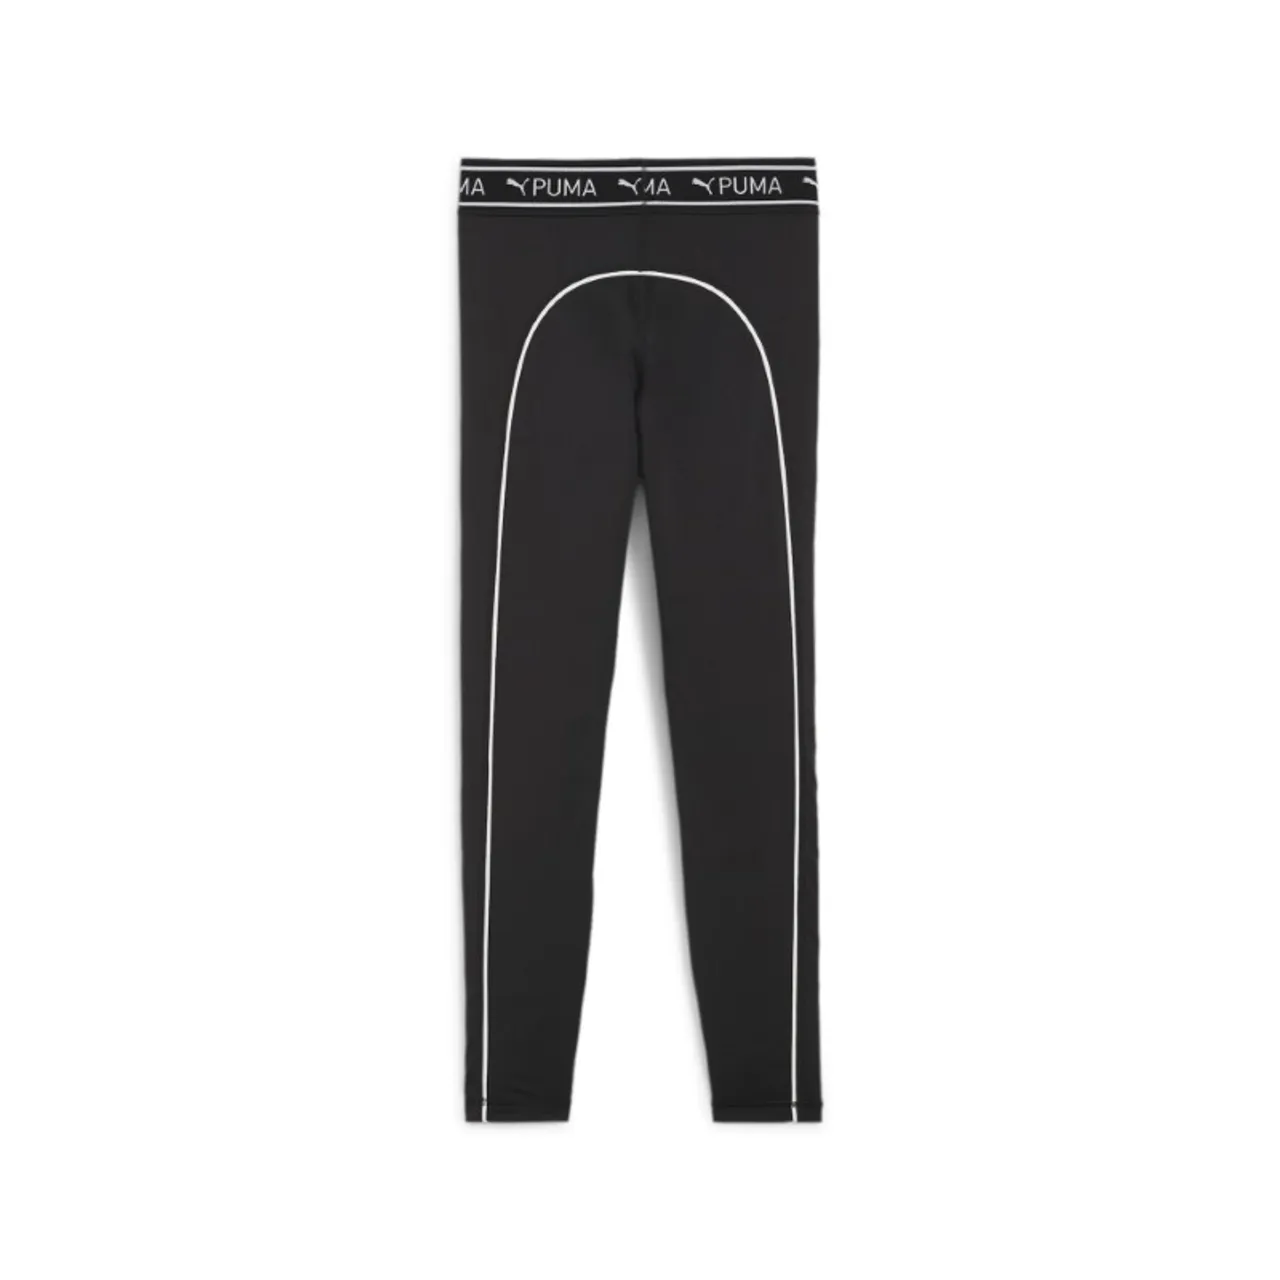 Puma Fit train strong 7/8 tight 525027-01